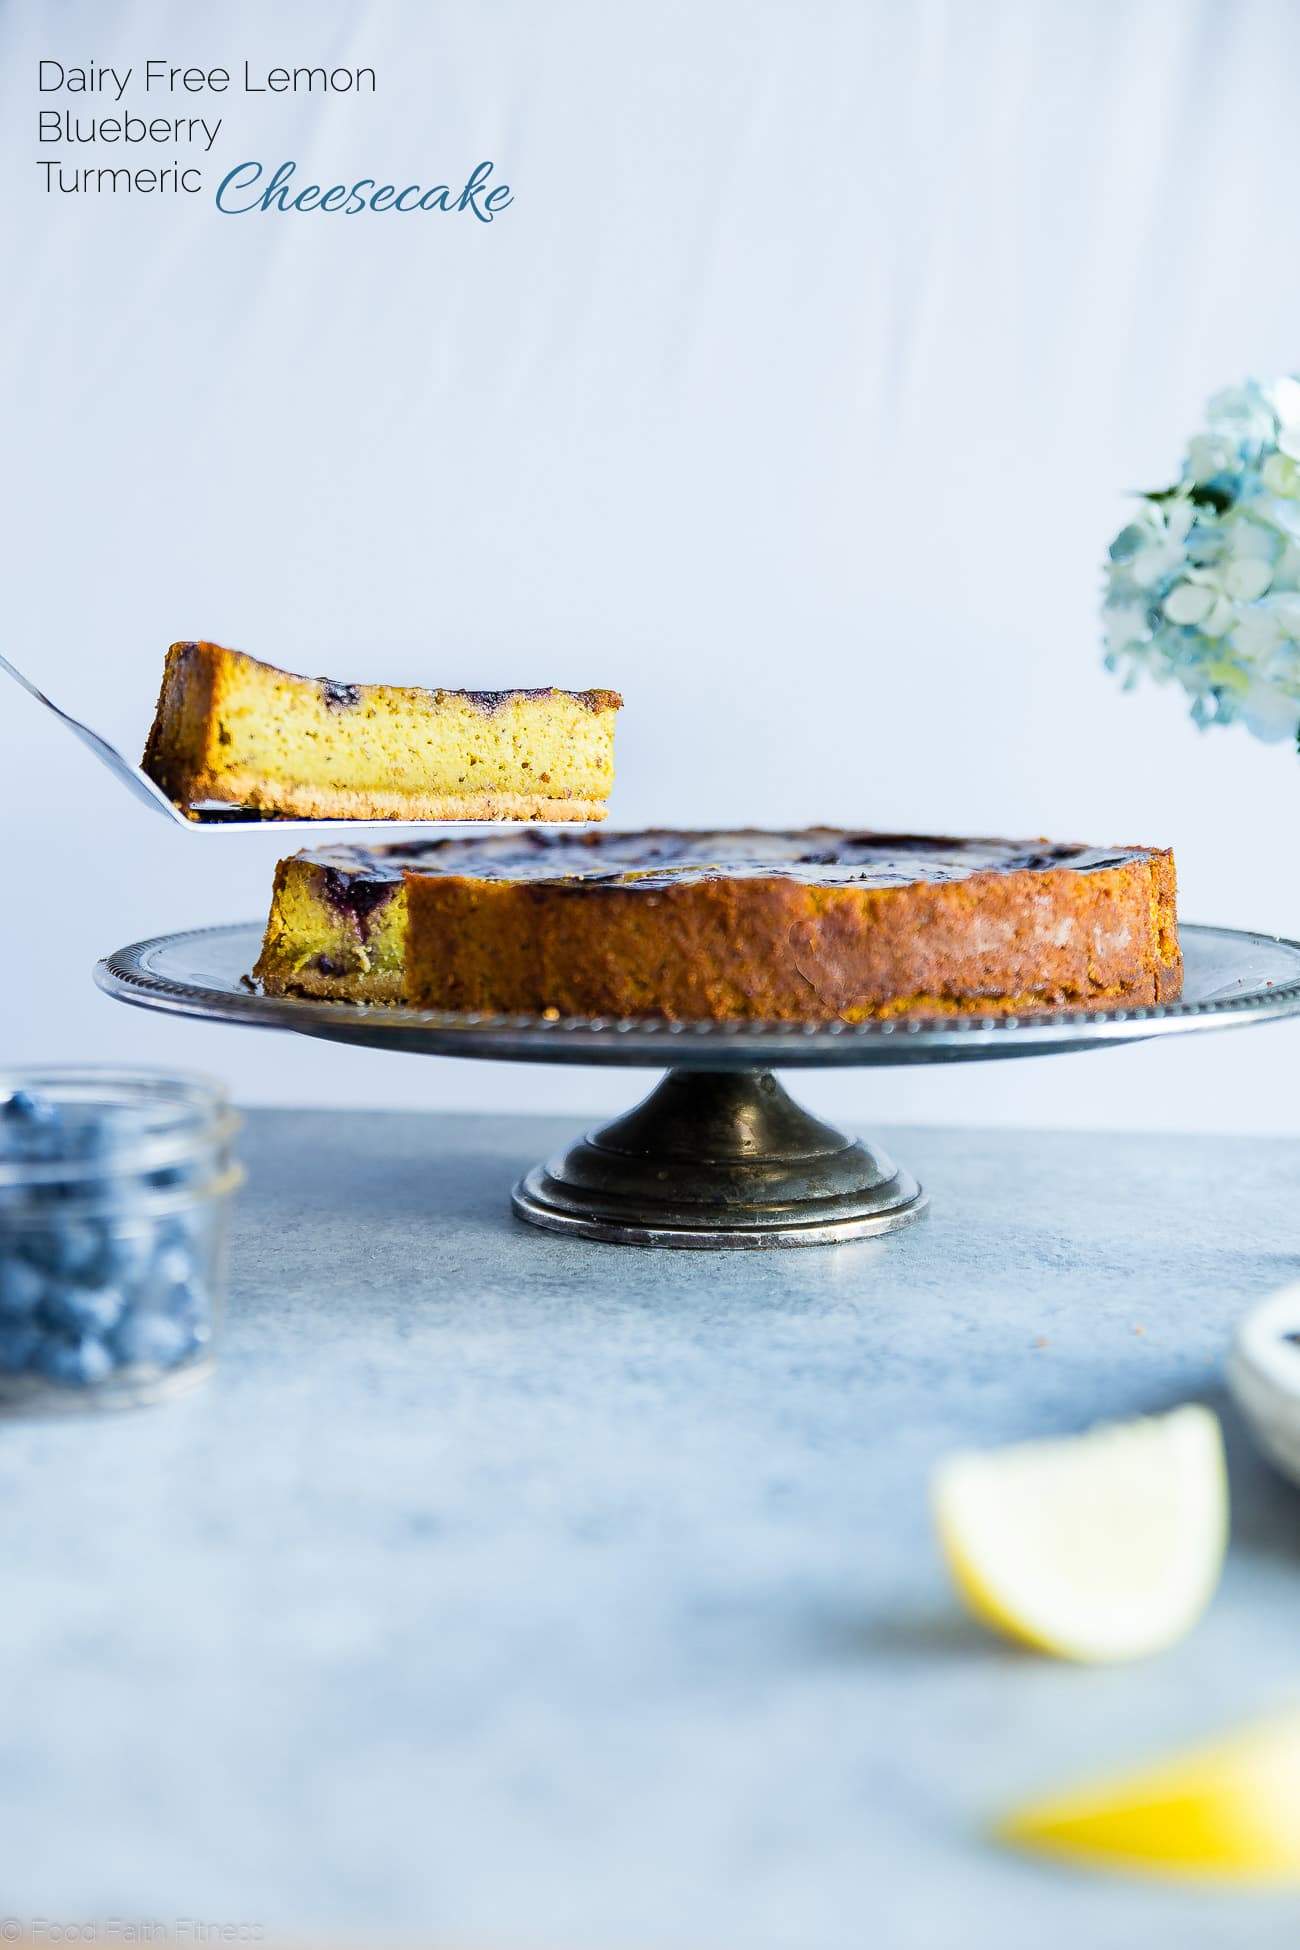 Blueberry Lemon Turmeric Vegan Cheesecake - This easy, paleo friendly cheesecake is made from cashews and has a blueberry swirl! It's so creamy you'll never know it's dairy, grain and gluten free! | Foodfaithfitness.com | @FoodFaithFit